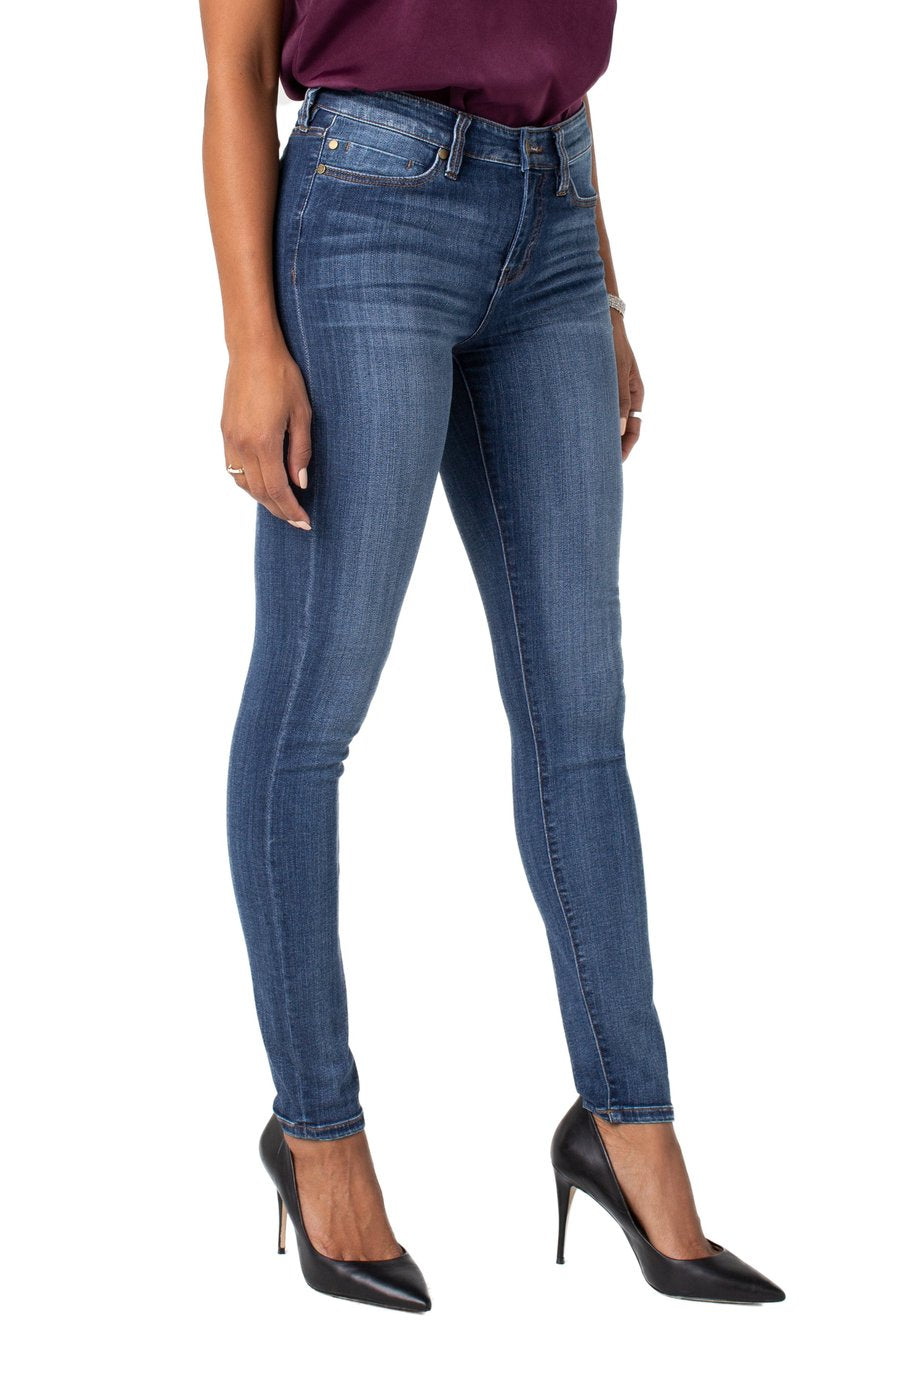 Liverpool Abby Skinny Jean 30”in - Victory